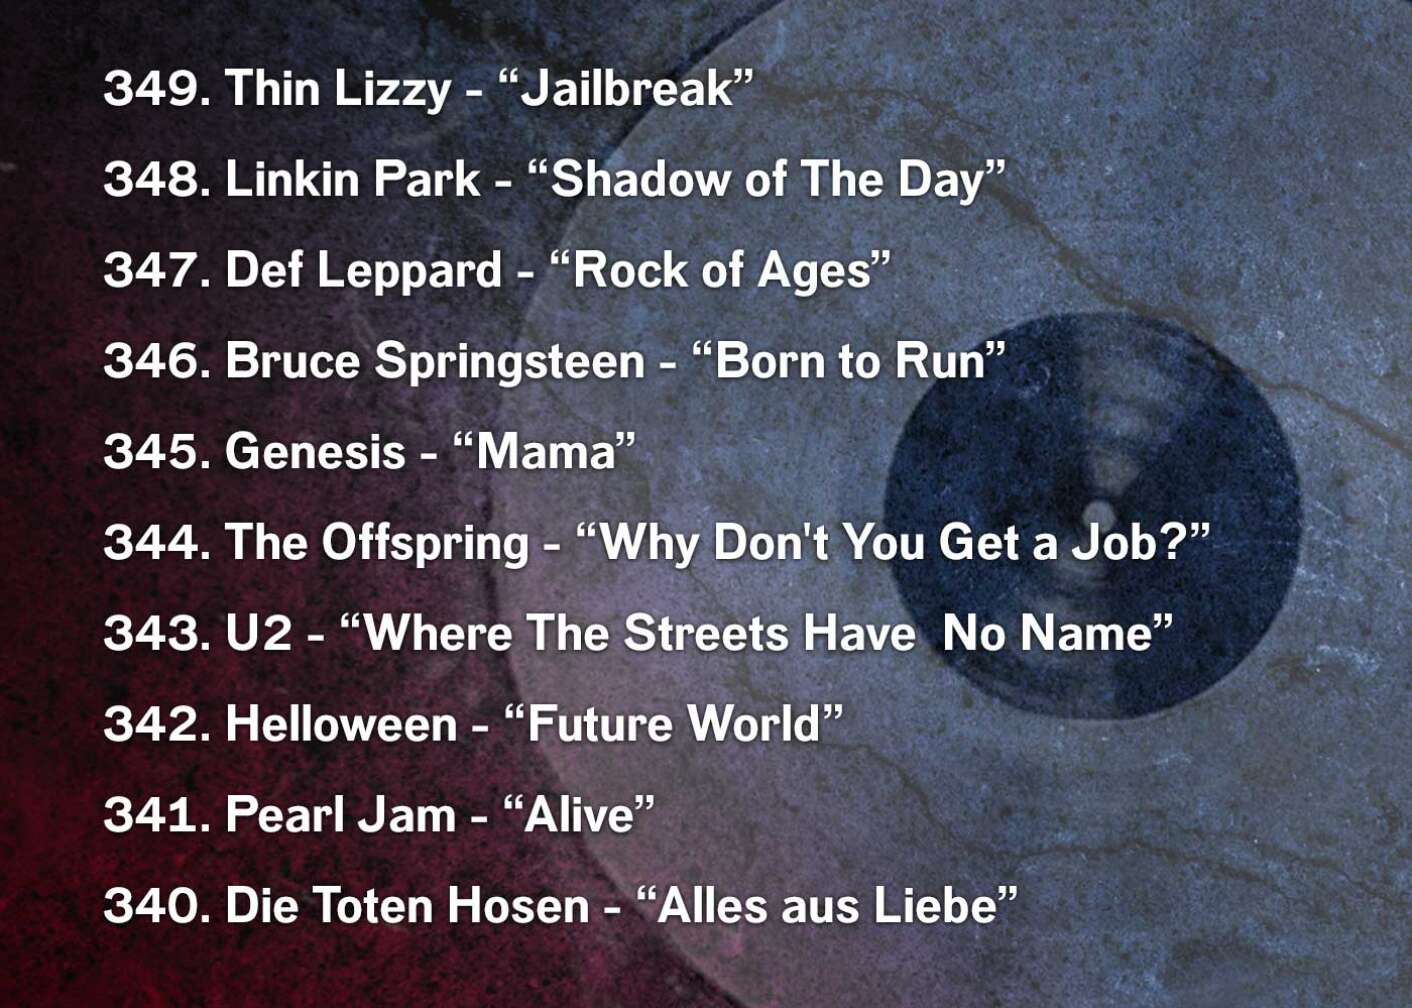 349. Thin Lizzy - “Jailbreak” 348. Linkin Park - “Shadow of The Day” 347. Def Leppard - “Rock of Ages” 346. Bruce Springsteen - “Born to Run” 345. Genesis - “Mama” 344. The Offspring - “Why Don't You Get a Job?” 343. U2 - “Where The Streets Have  No Name” 342. Helloween - “Future World” 341. Pearl Jam - “Alive” 340. Die Toten Hosen - “Alles aus Liebe”